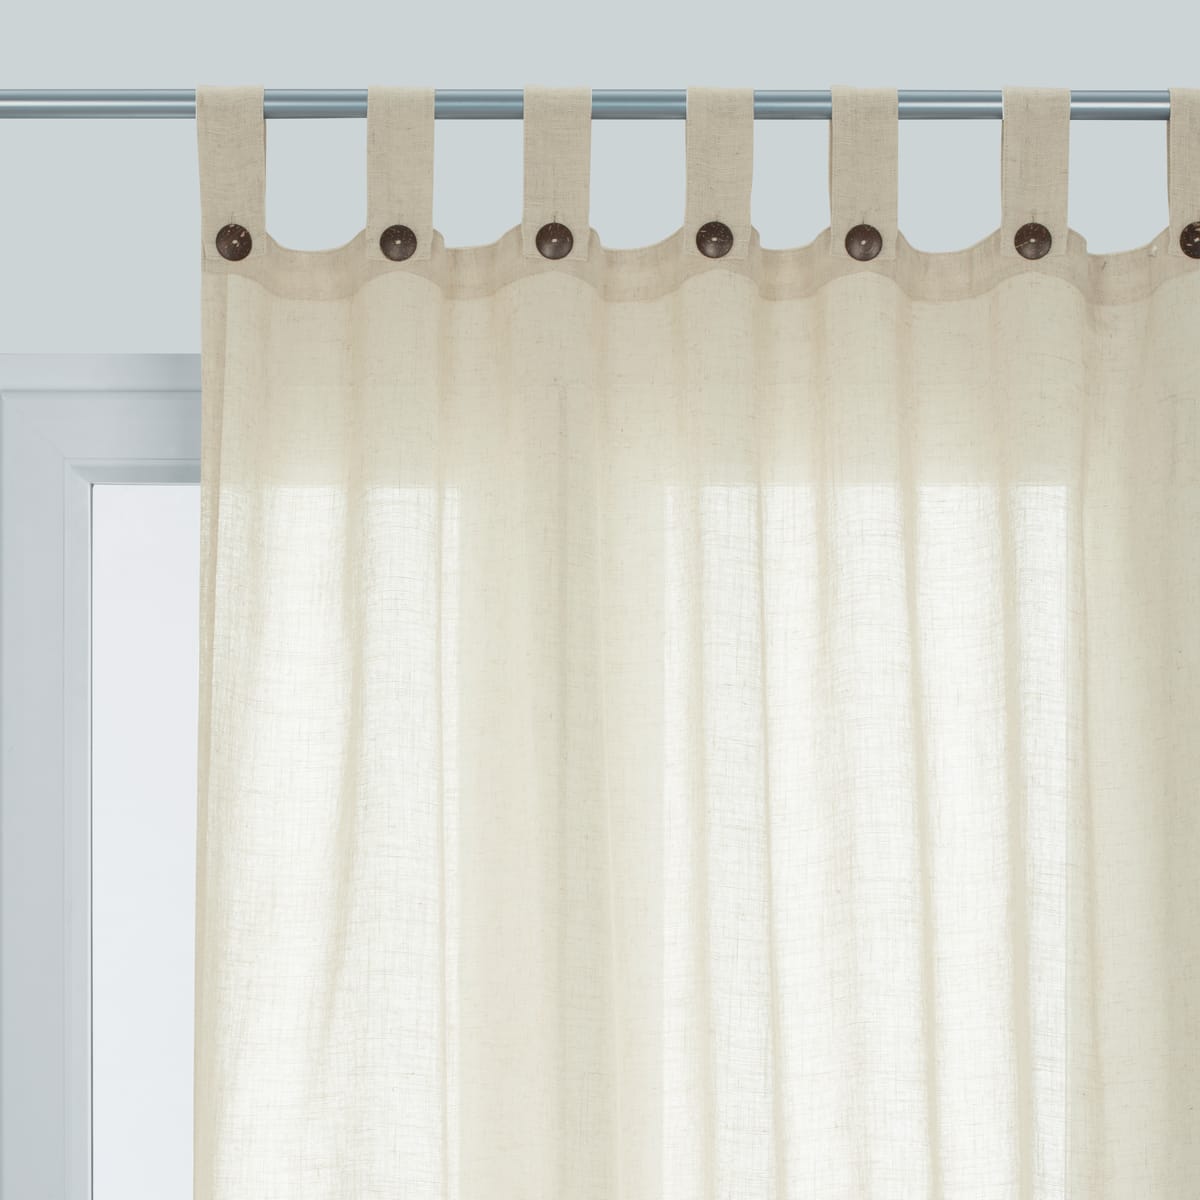 CHARLINA ECRU OPAQUE CURTAIN 140X280 WITH LOOPS AND BUTTONS